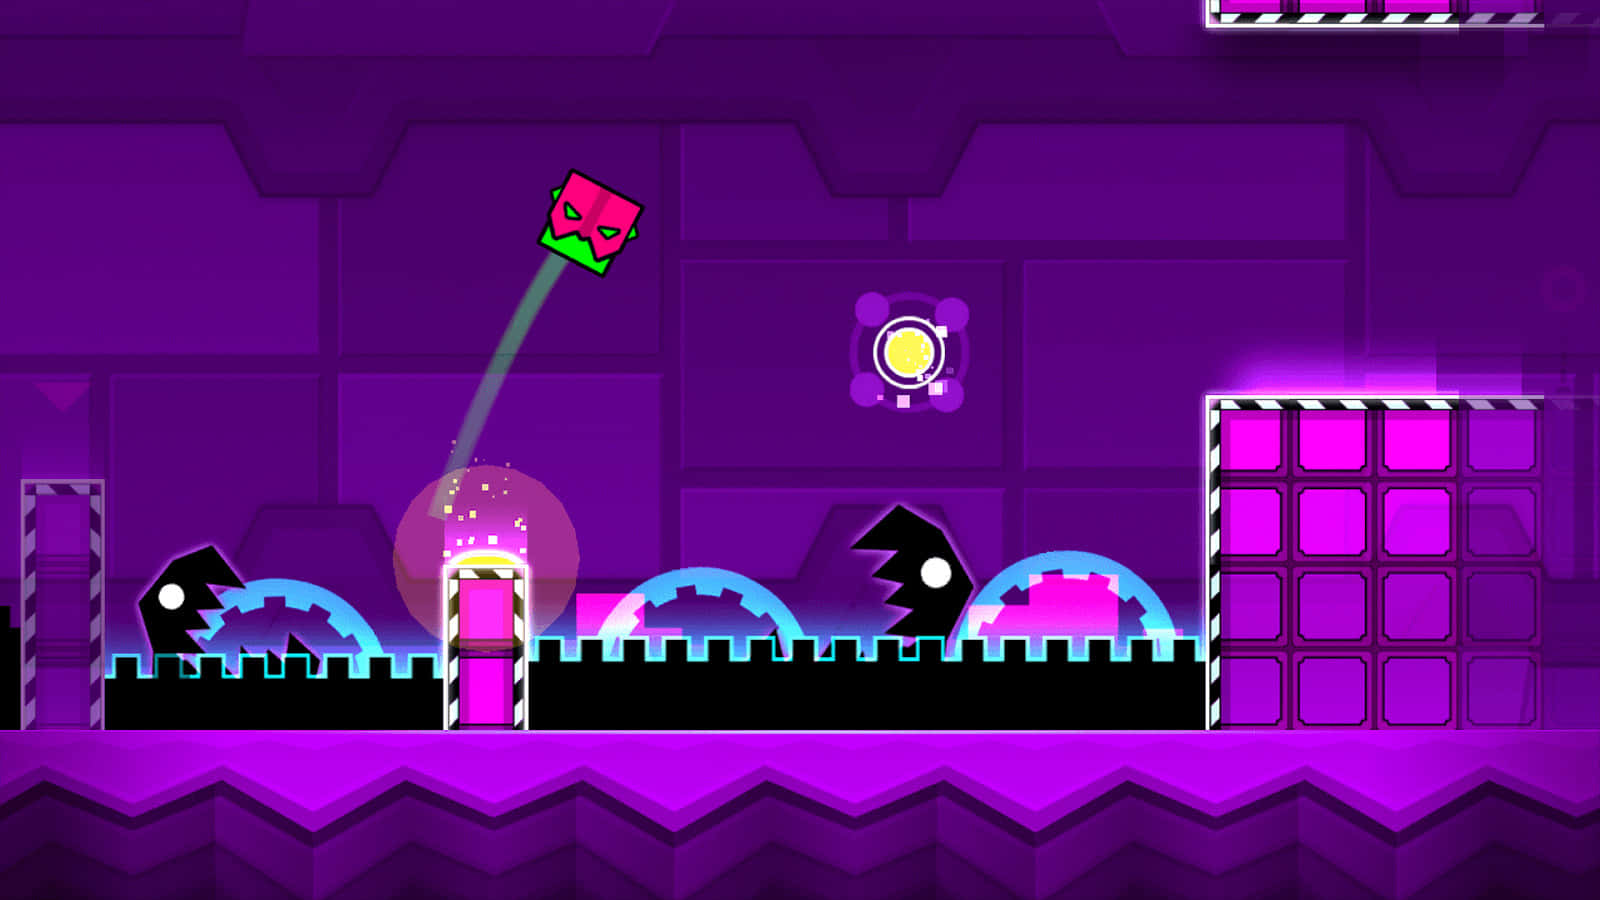 "Jump Your Way Through Fun Obstacles with Geometry Dash!"